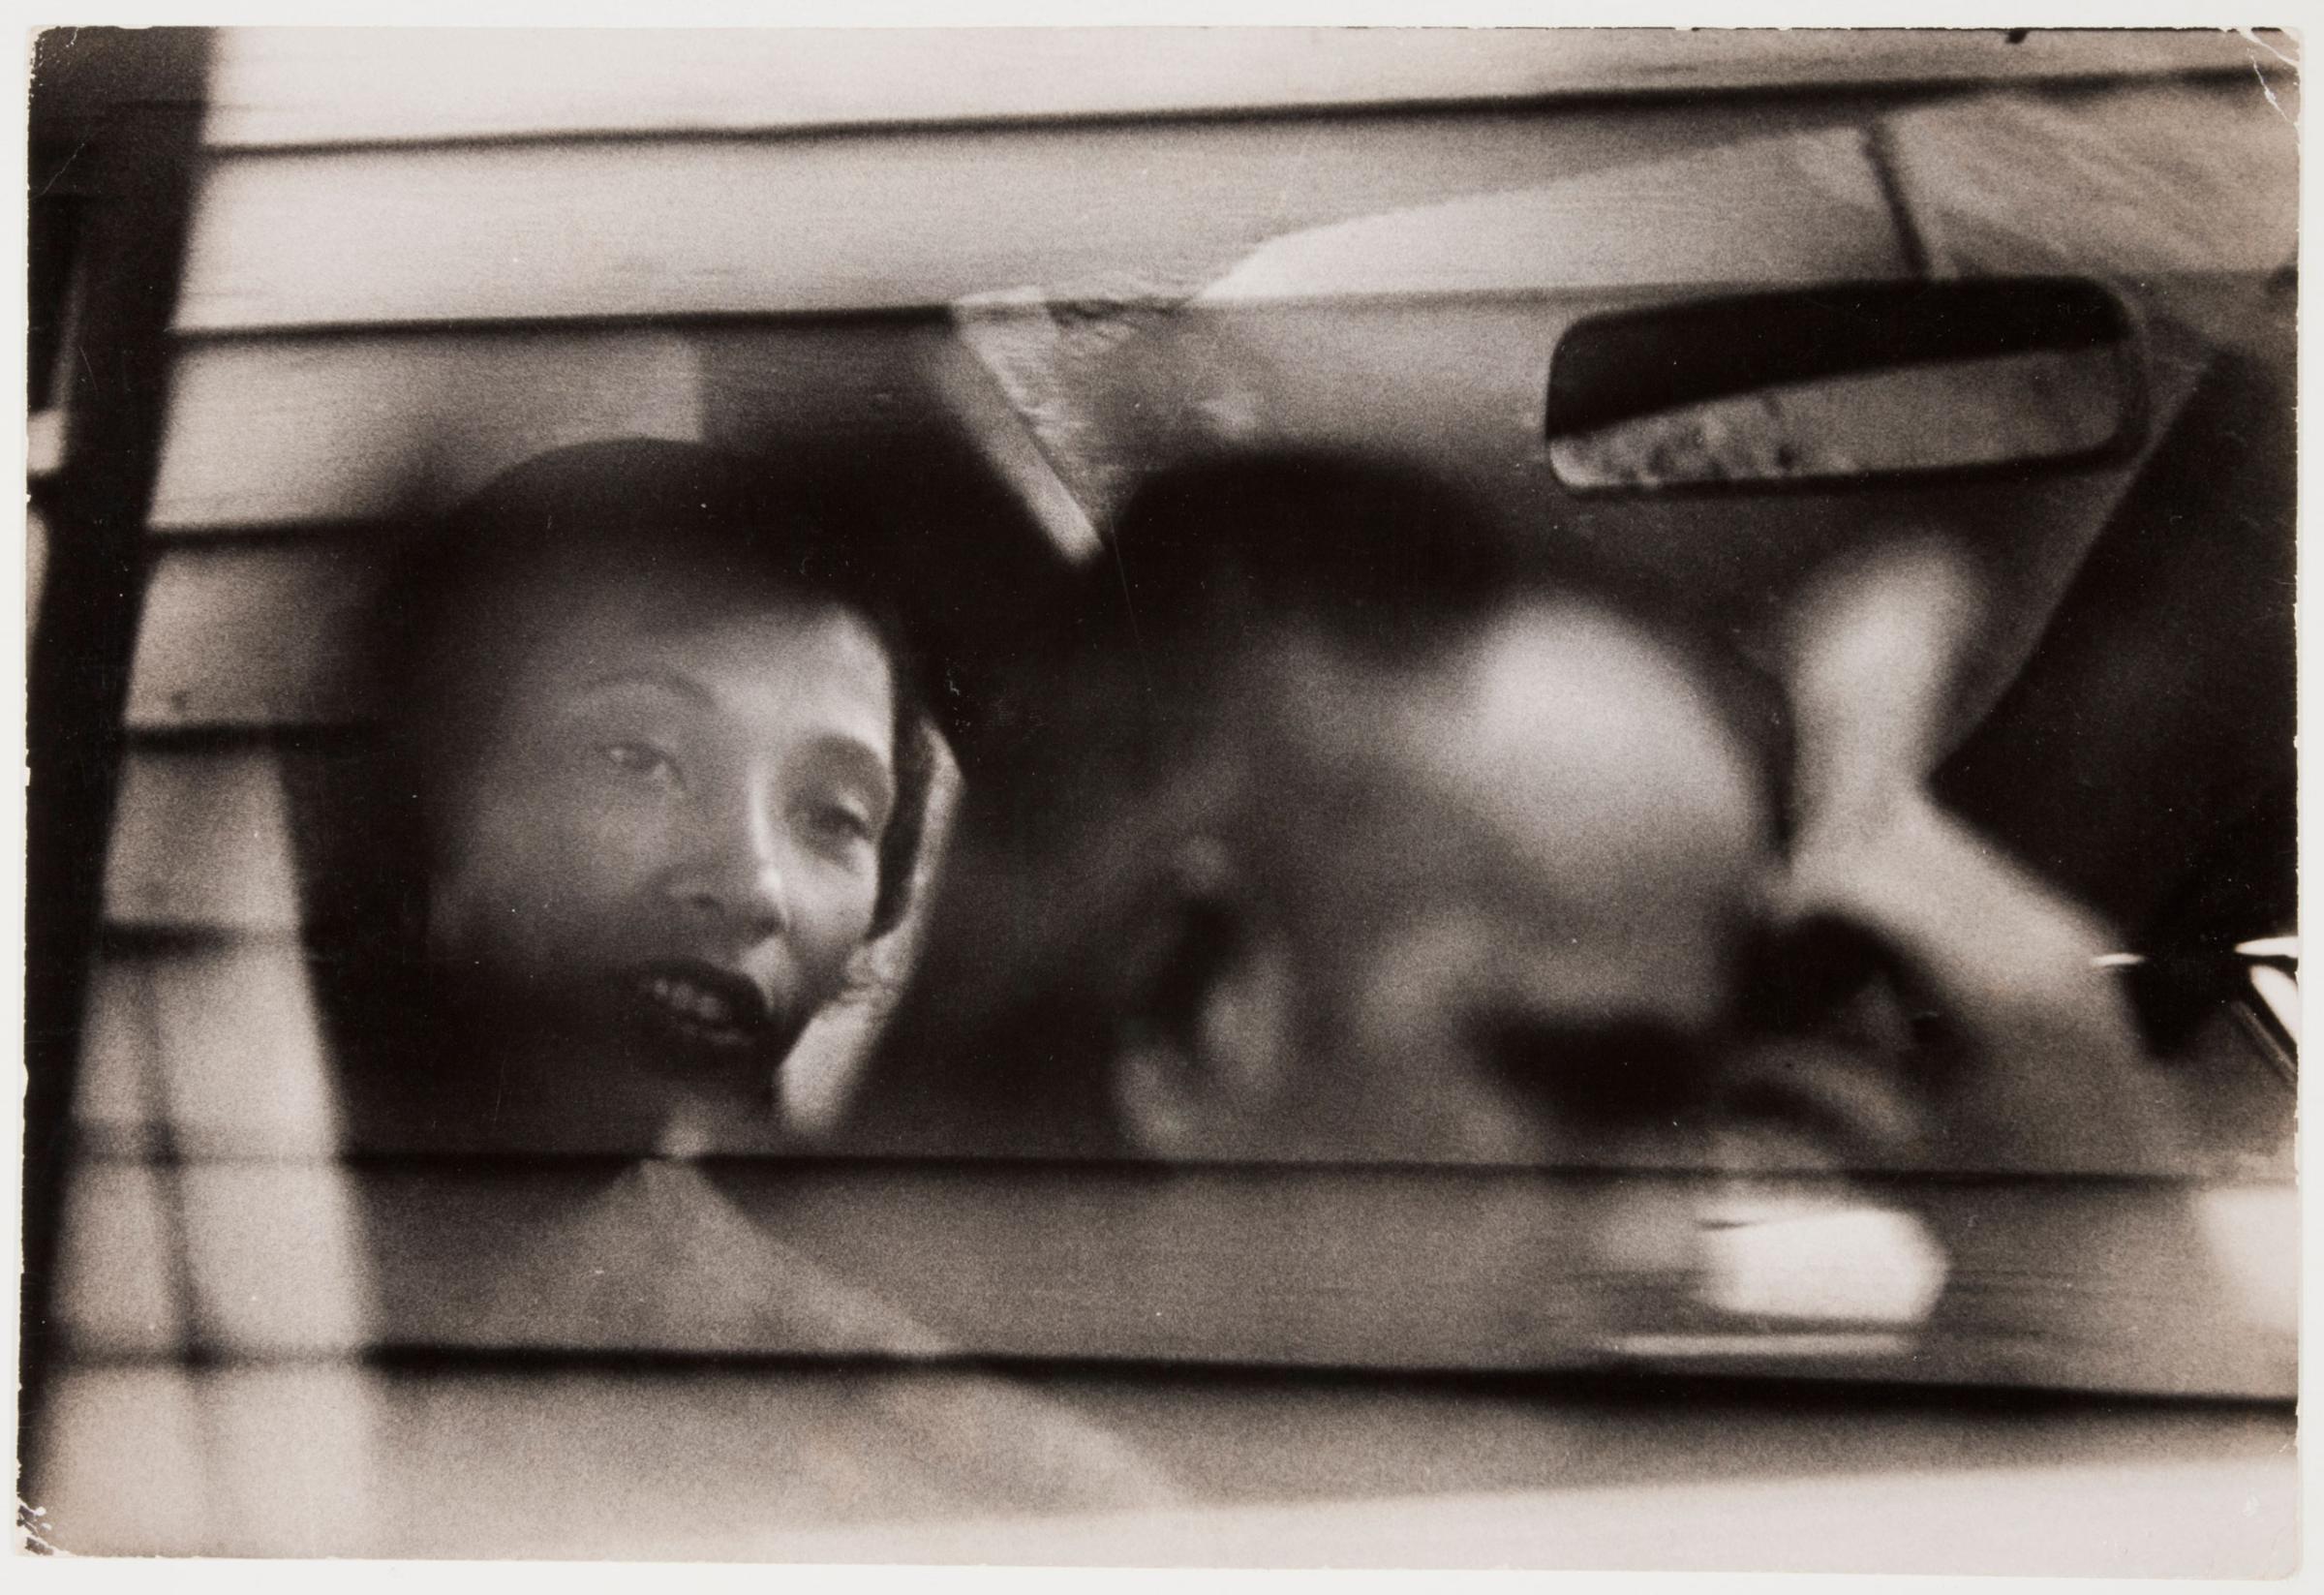 Richard and Mildred Loving sit in their car outside a country store, Virginia, April 1965.